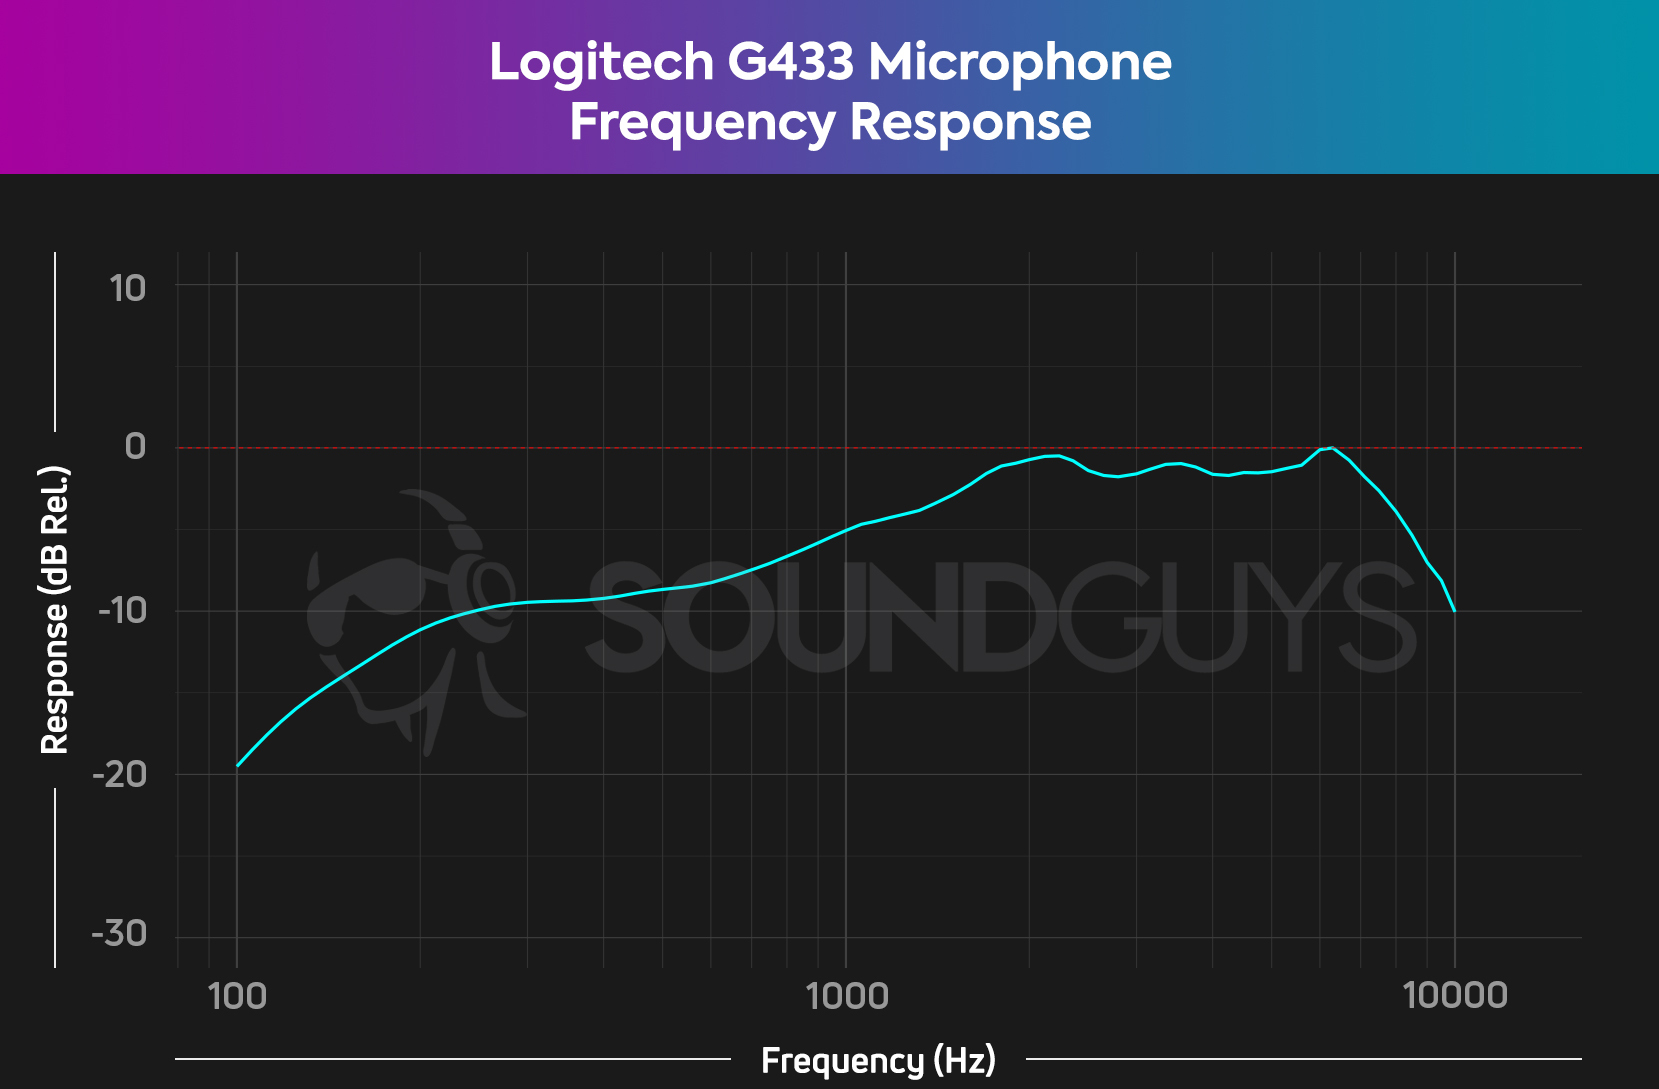 The Logitech G433 microphone frequency response curve showing a lack of bass response but a general emphasis on the mids and highs.